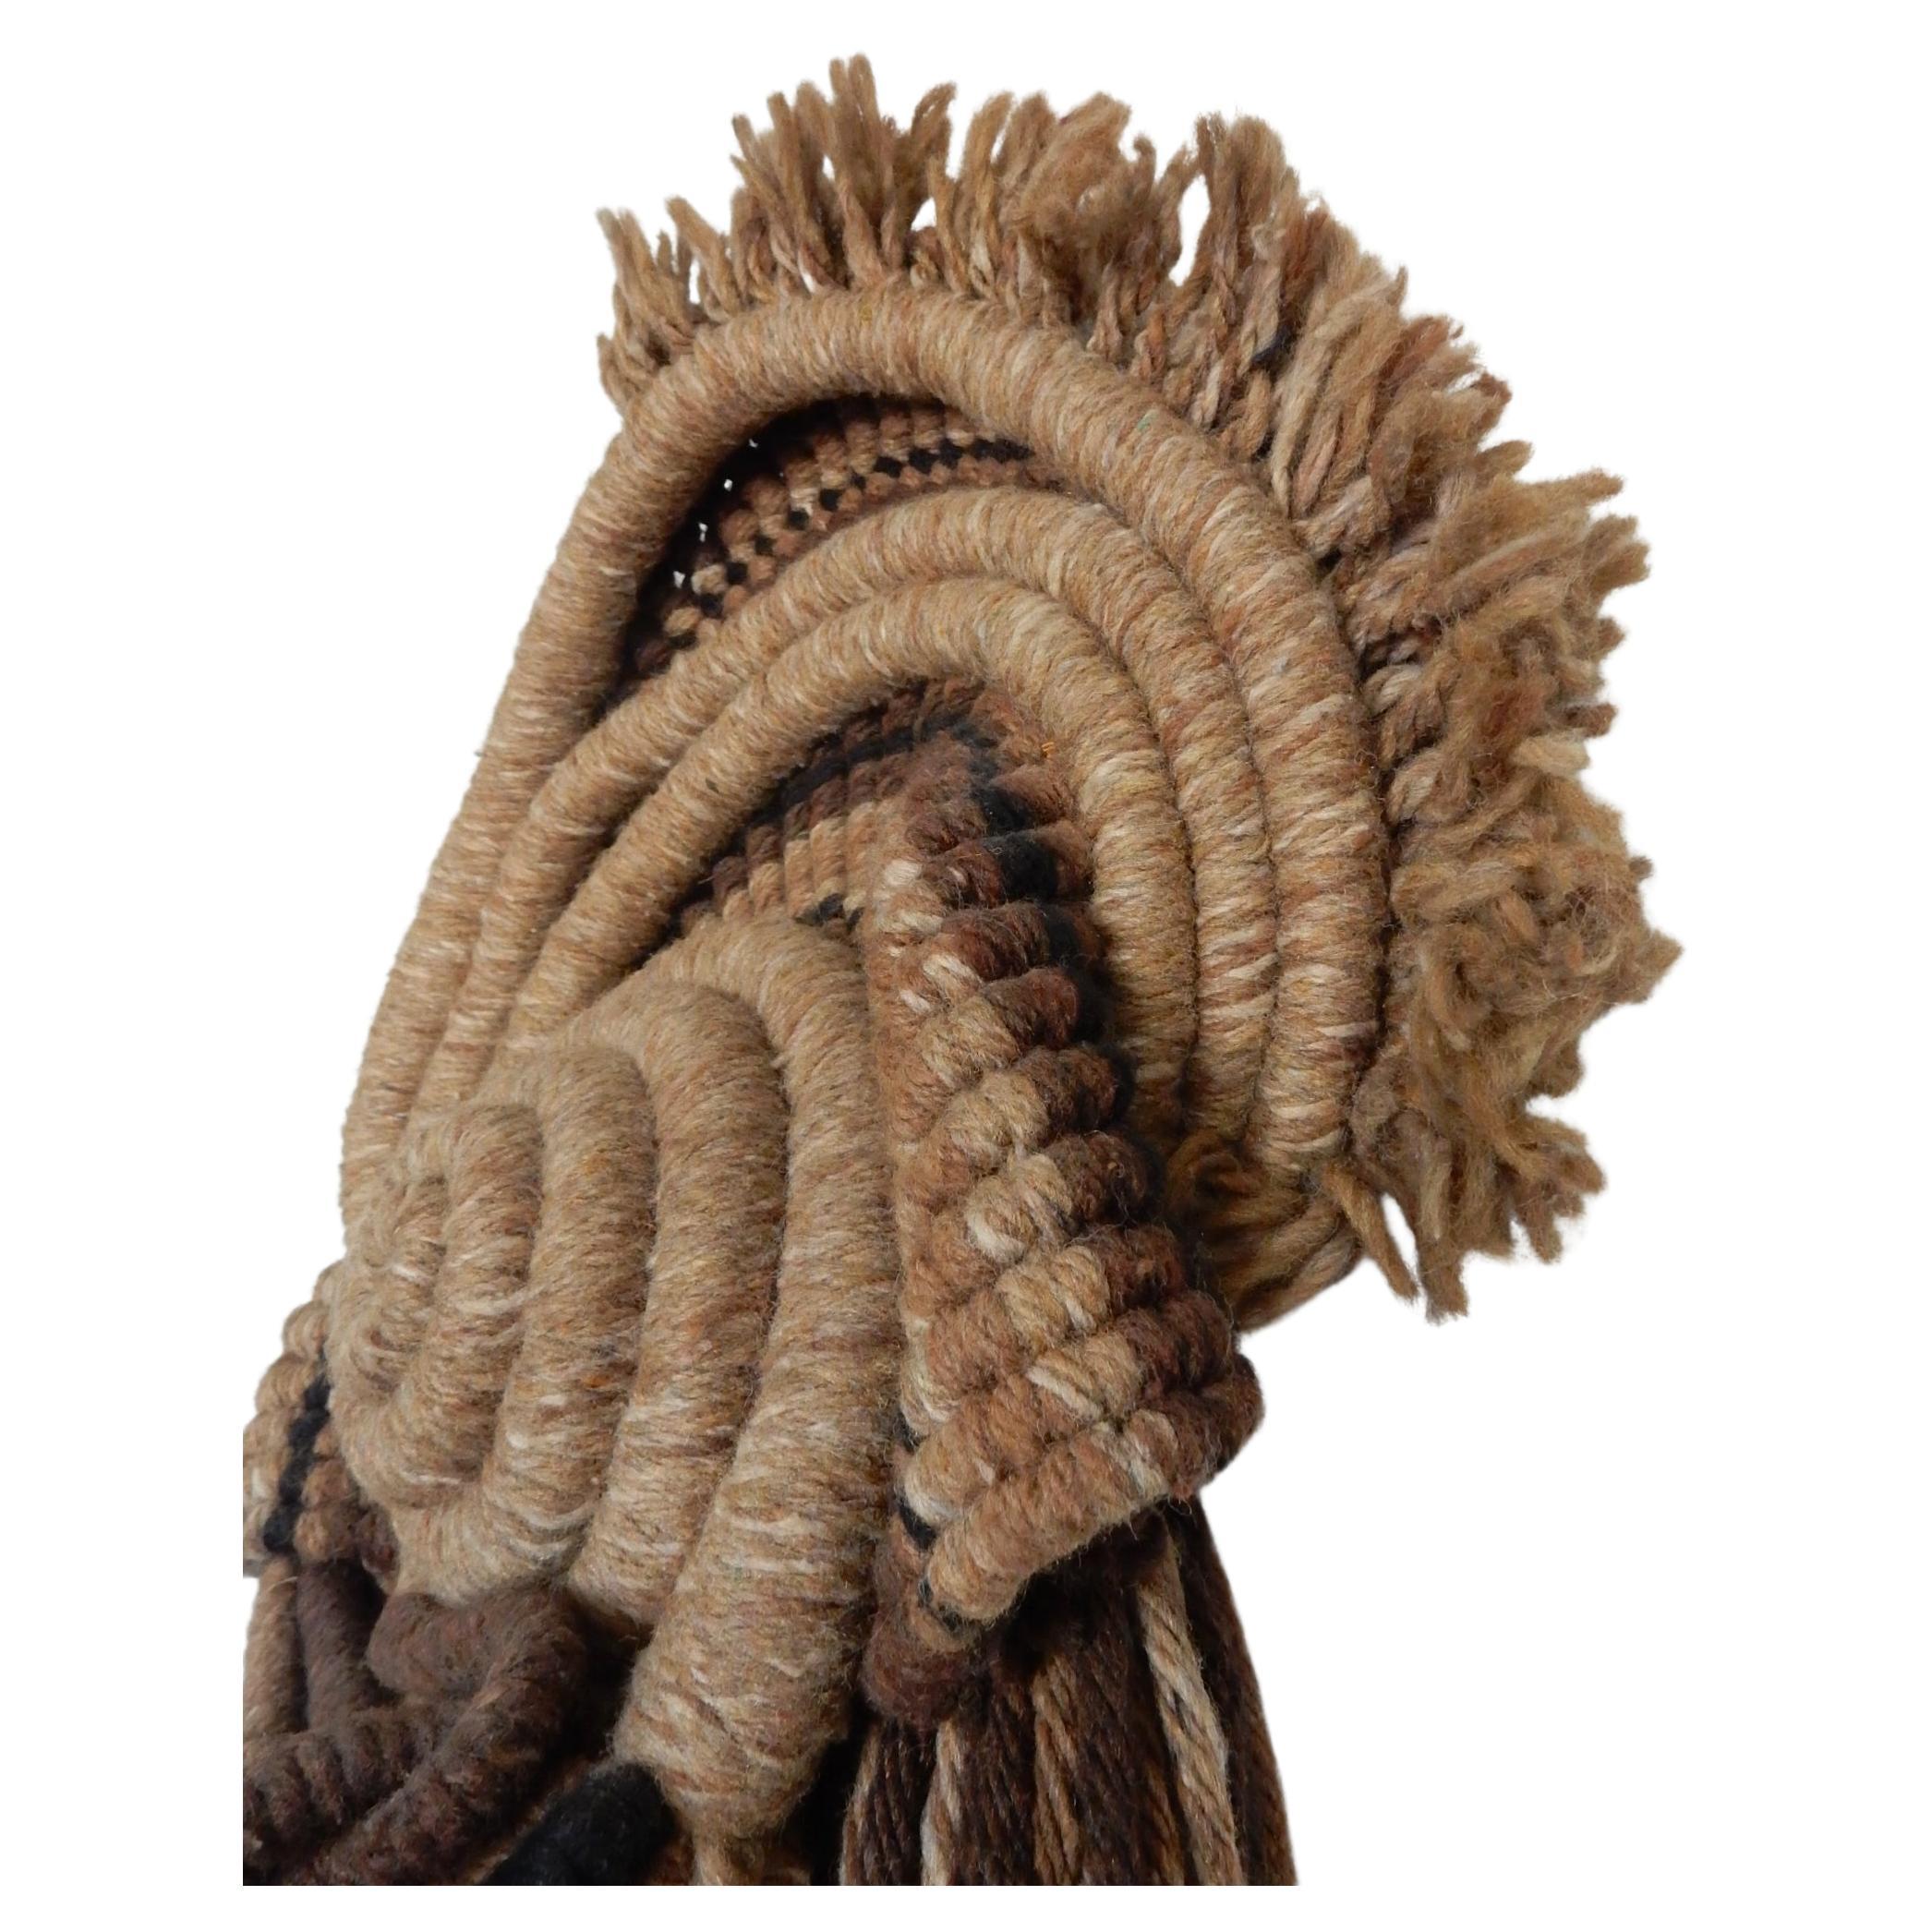 Hand-Knotted Organic Braided Wool Textile Wall Art Sculpture